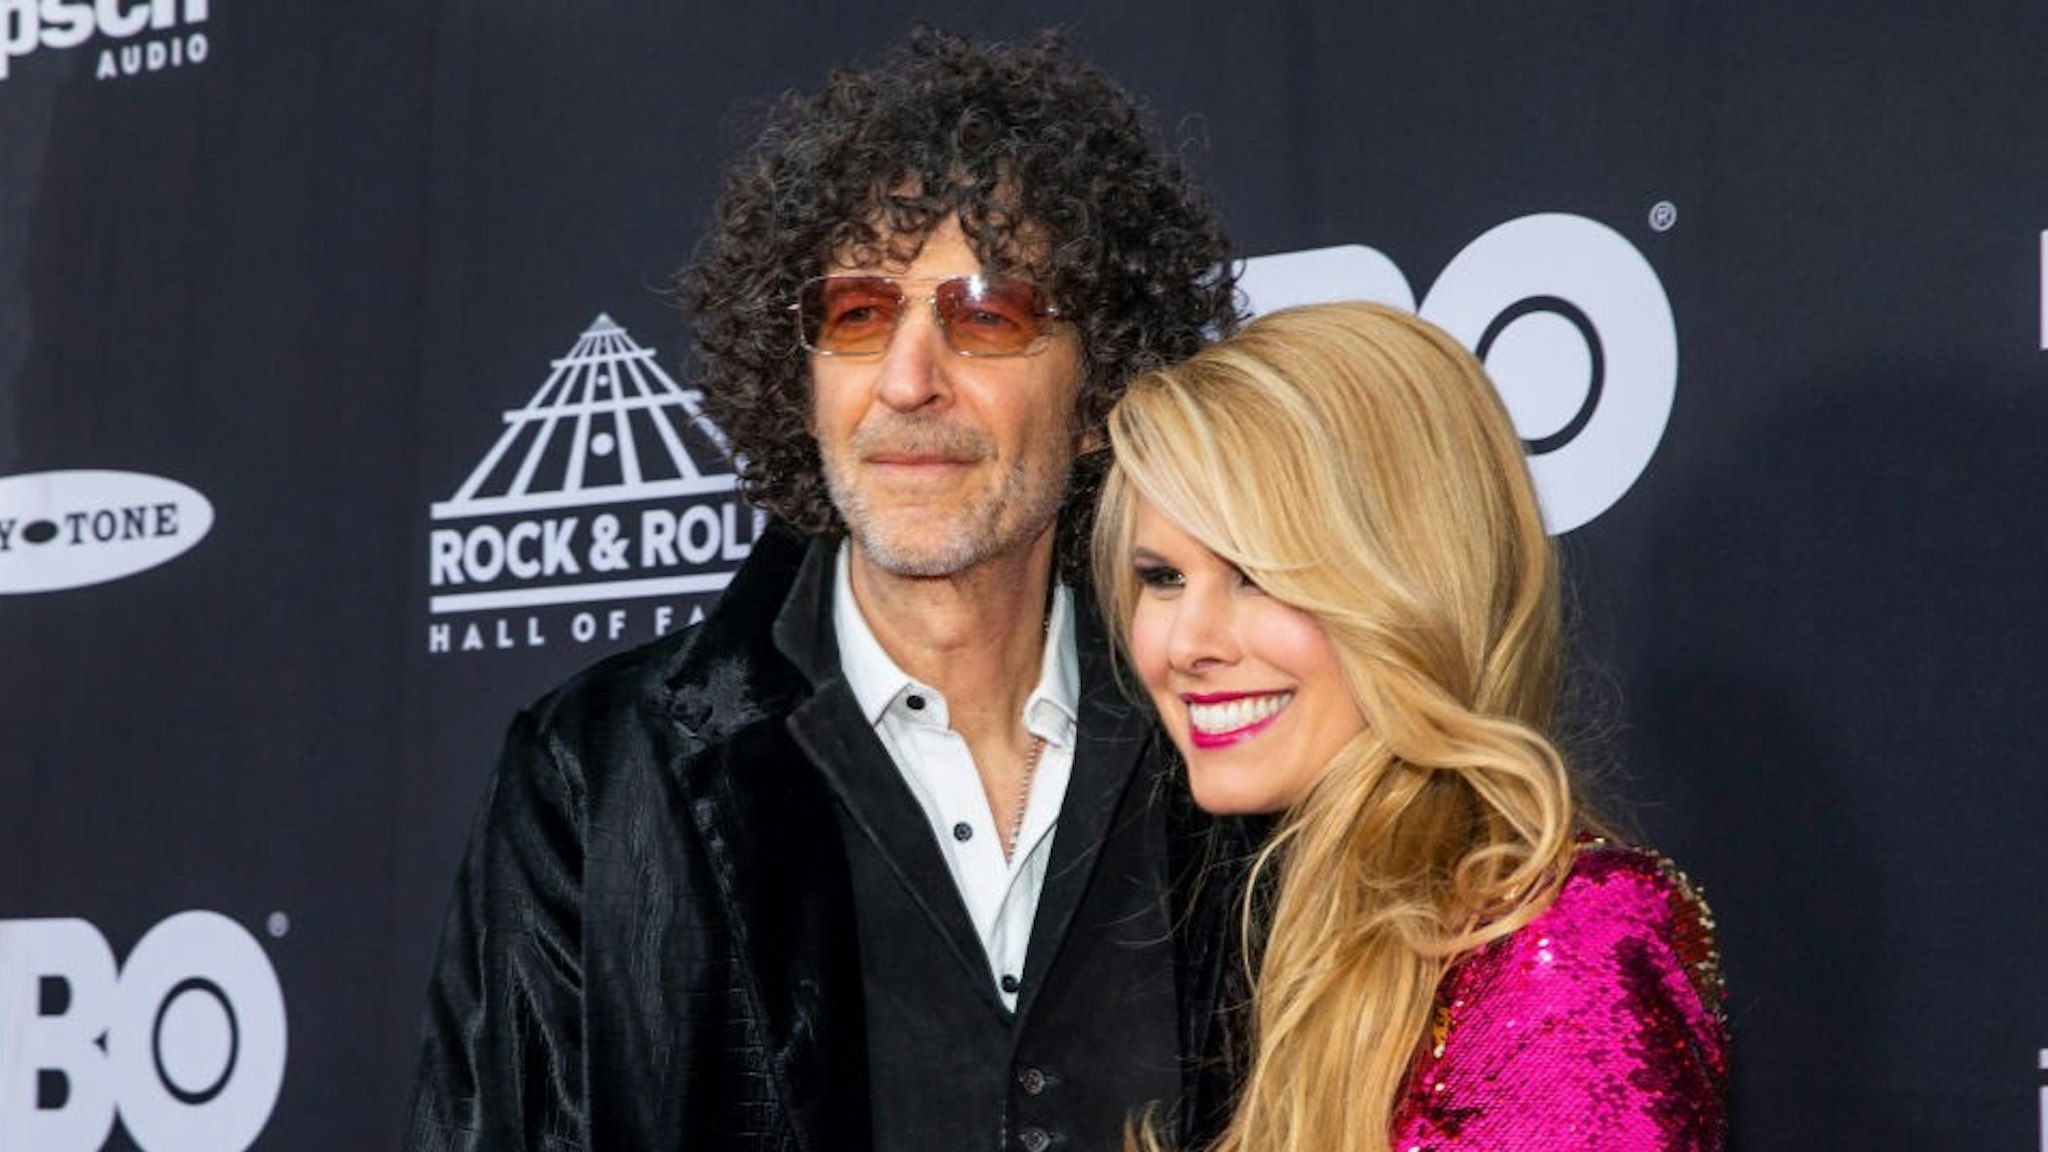 Howard Stern and Beth Ostrosky Stern attend the 33rd Annual Rock & Roll Hall of Fame Induction Ceremony at Public Auditorium on April 14, 2018 in Cleveland, Ohio